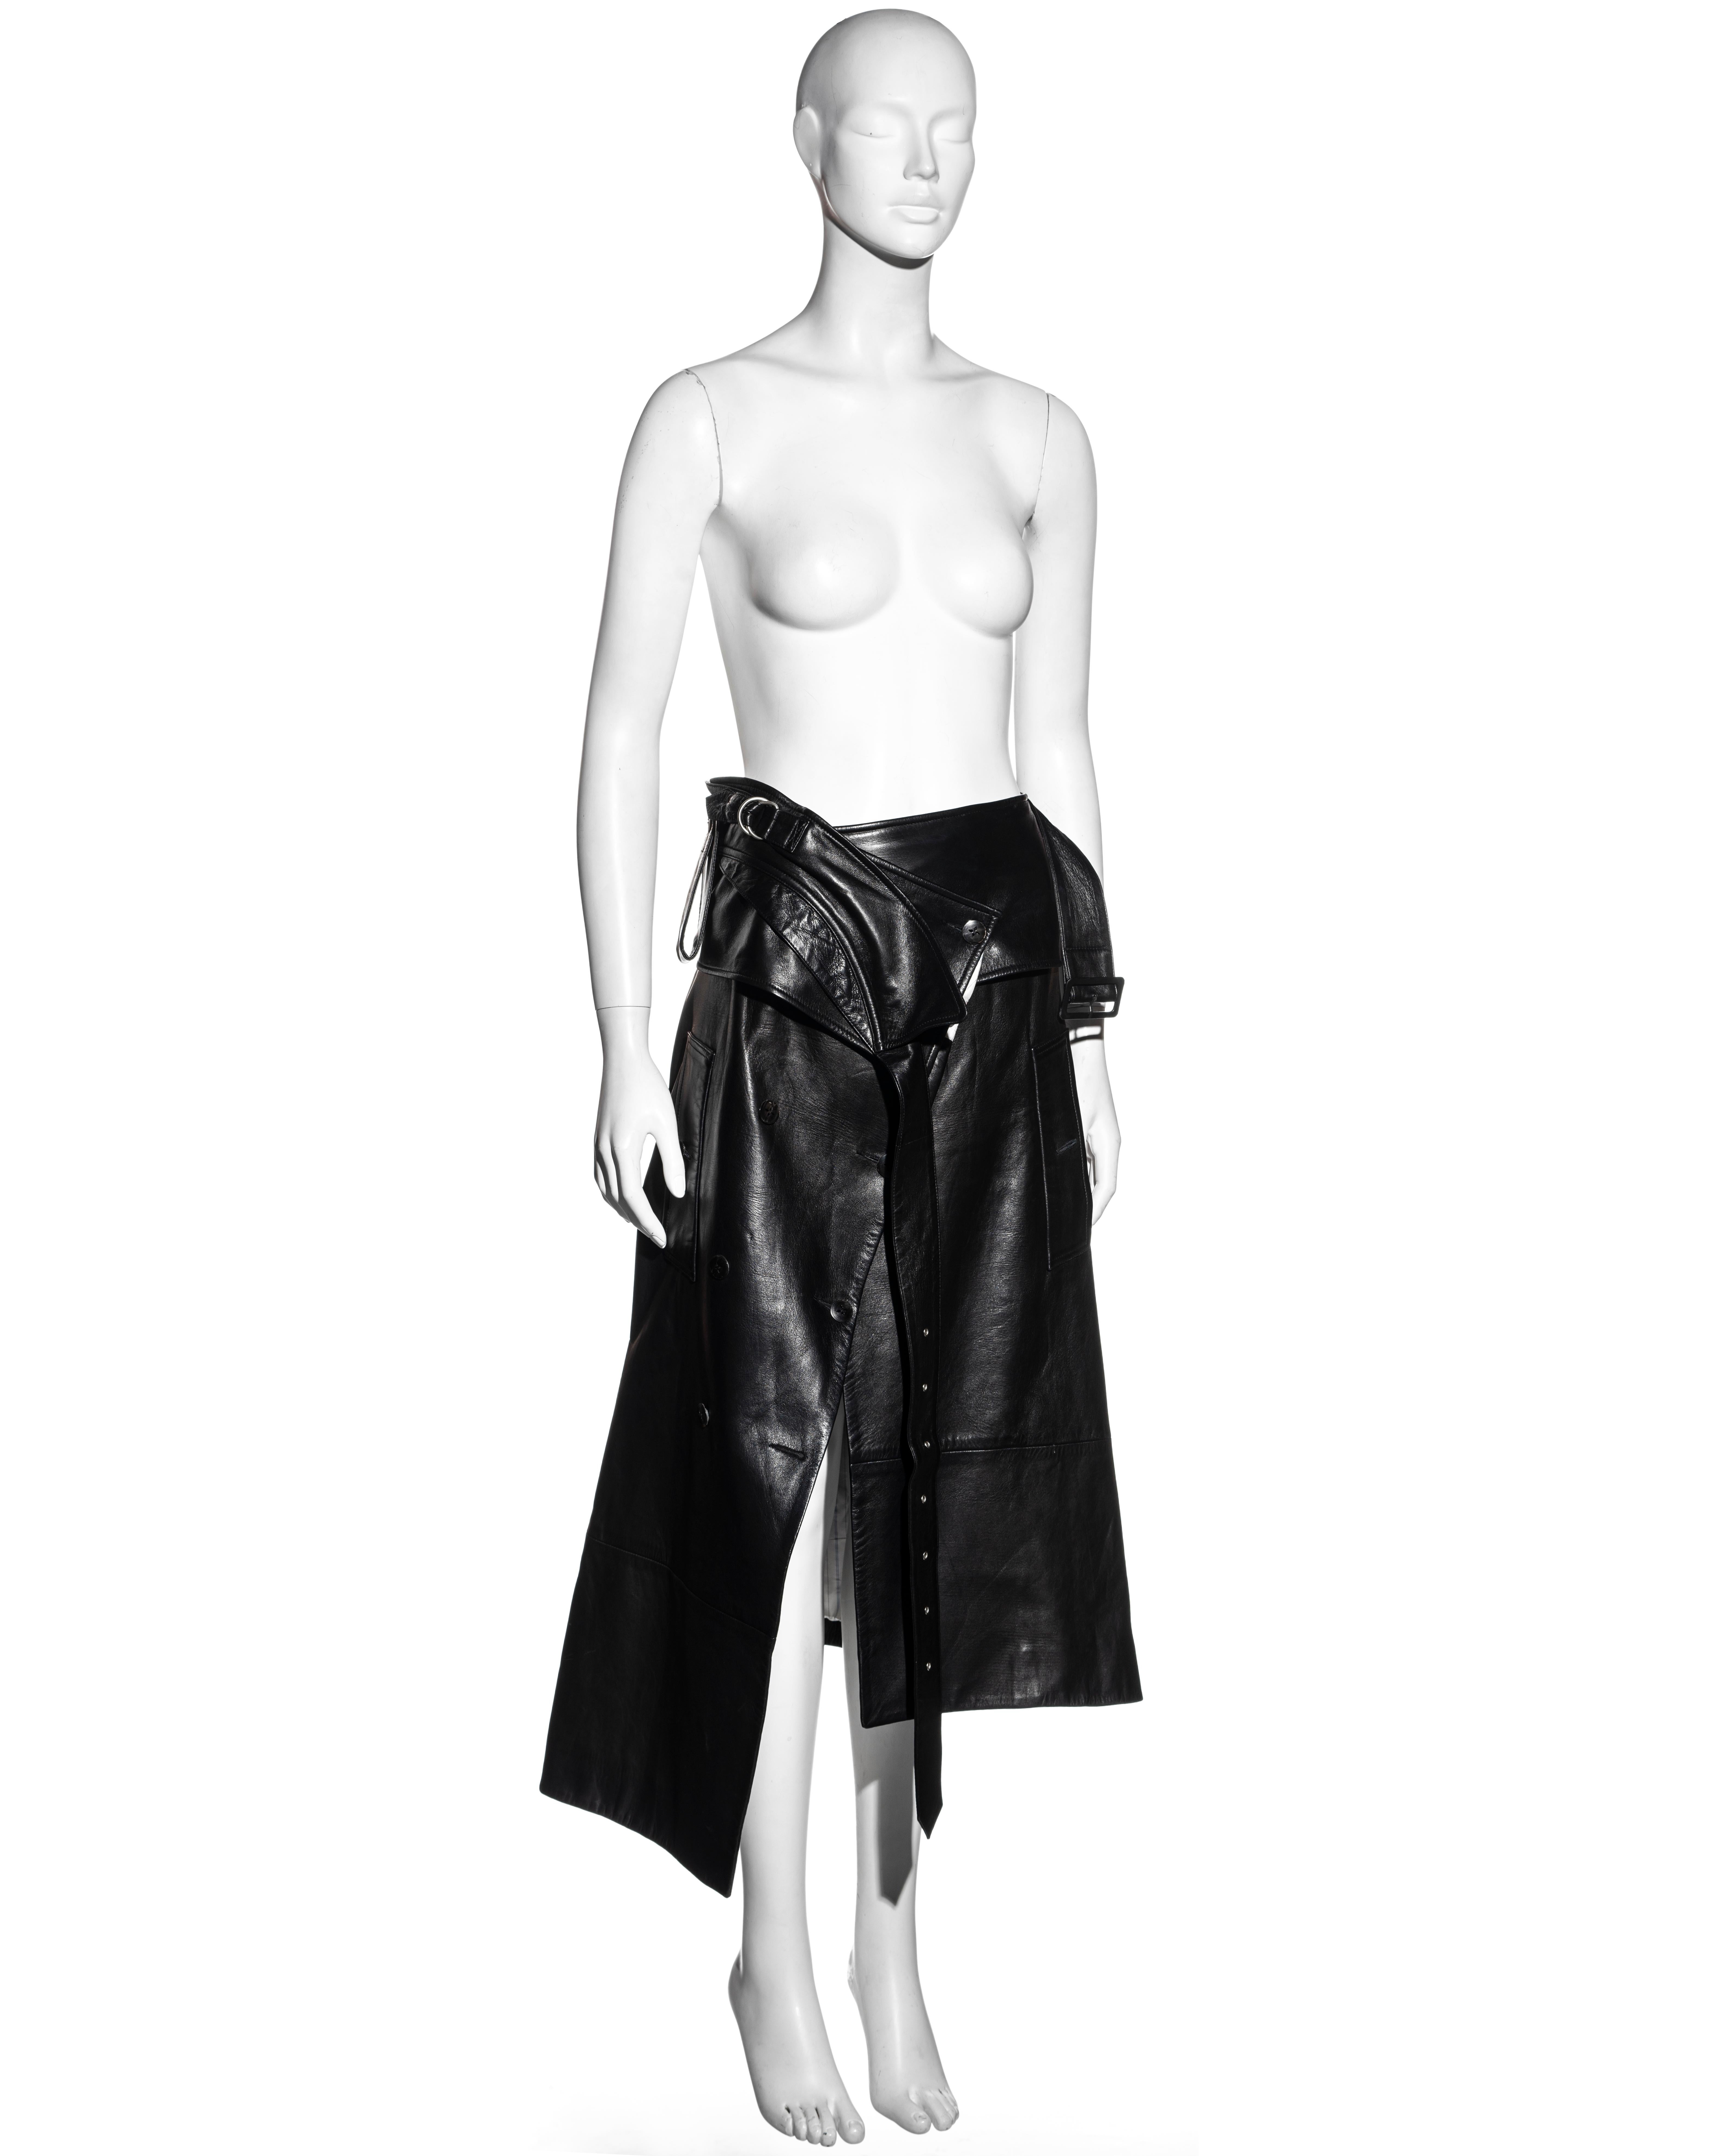 Black John Galliano black leather deconstructed wrap skirt, c. 2002 For Sale